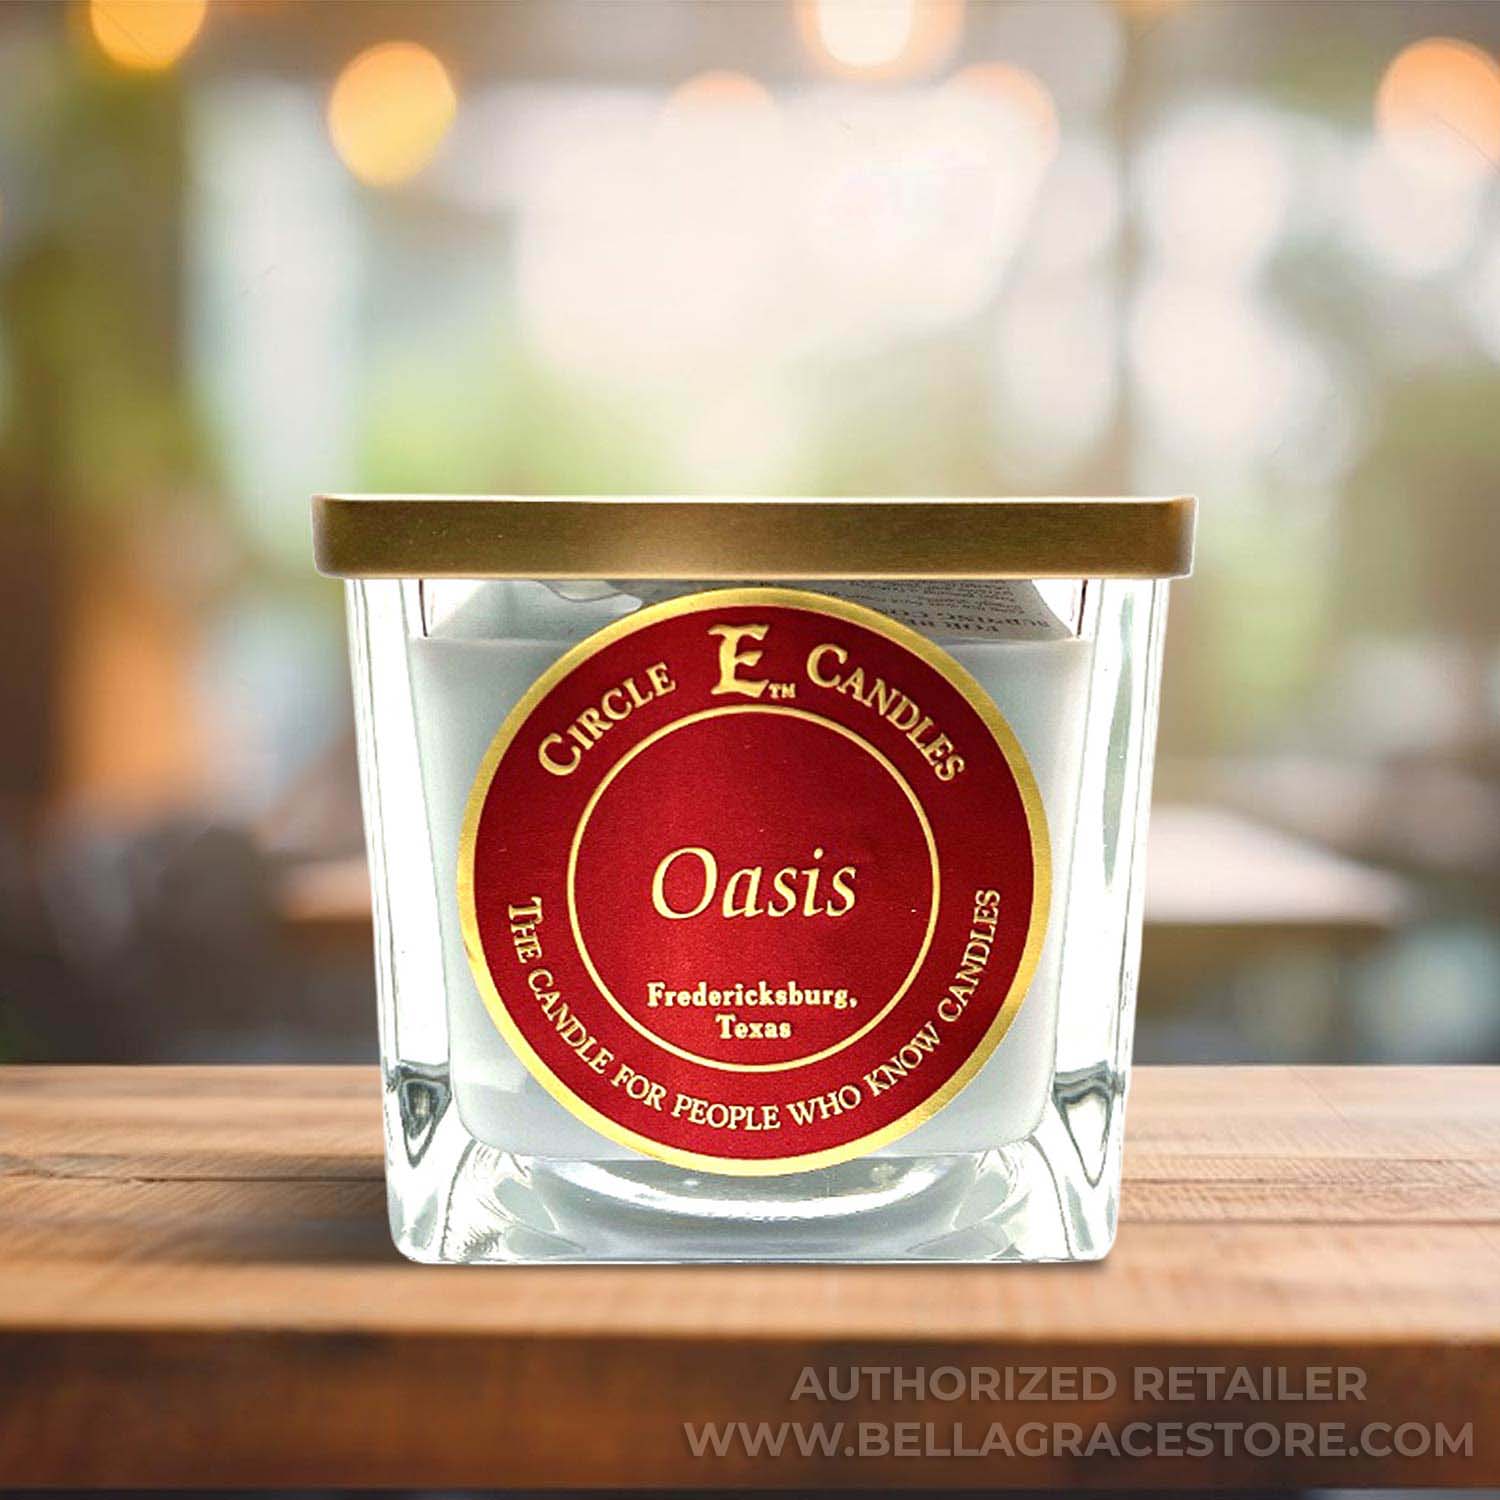 Circle E Candles, Oasis Scent, Large Size Jar Candle, 43oz, 4 Wicks